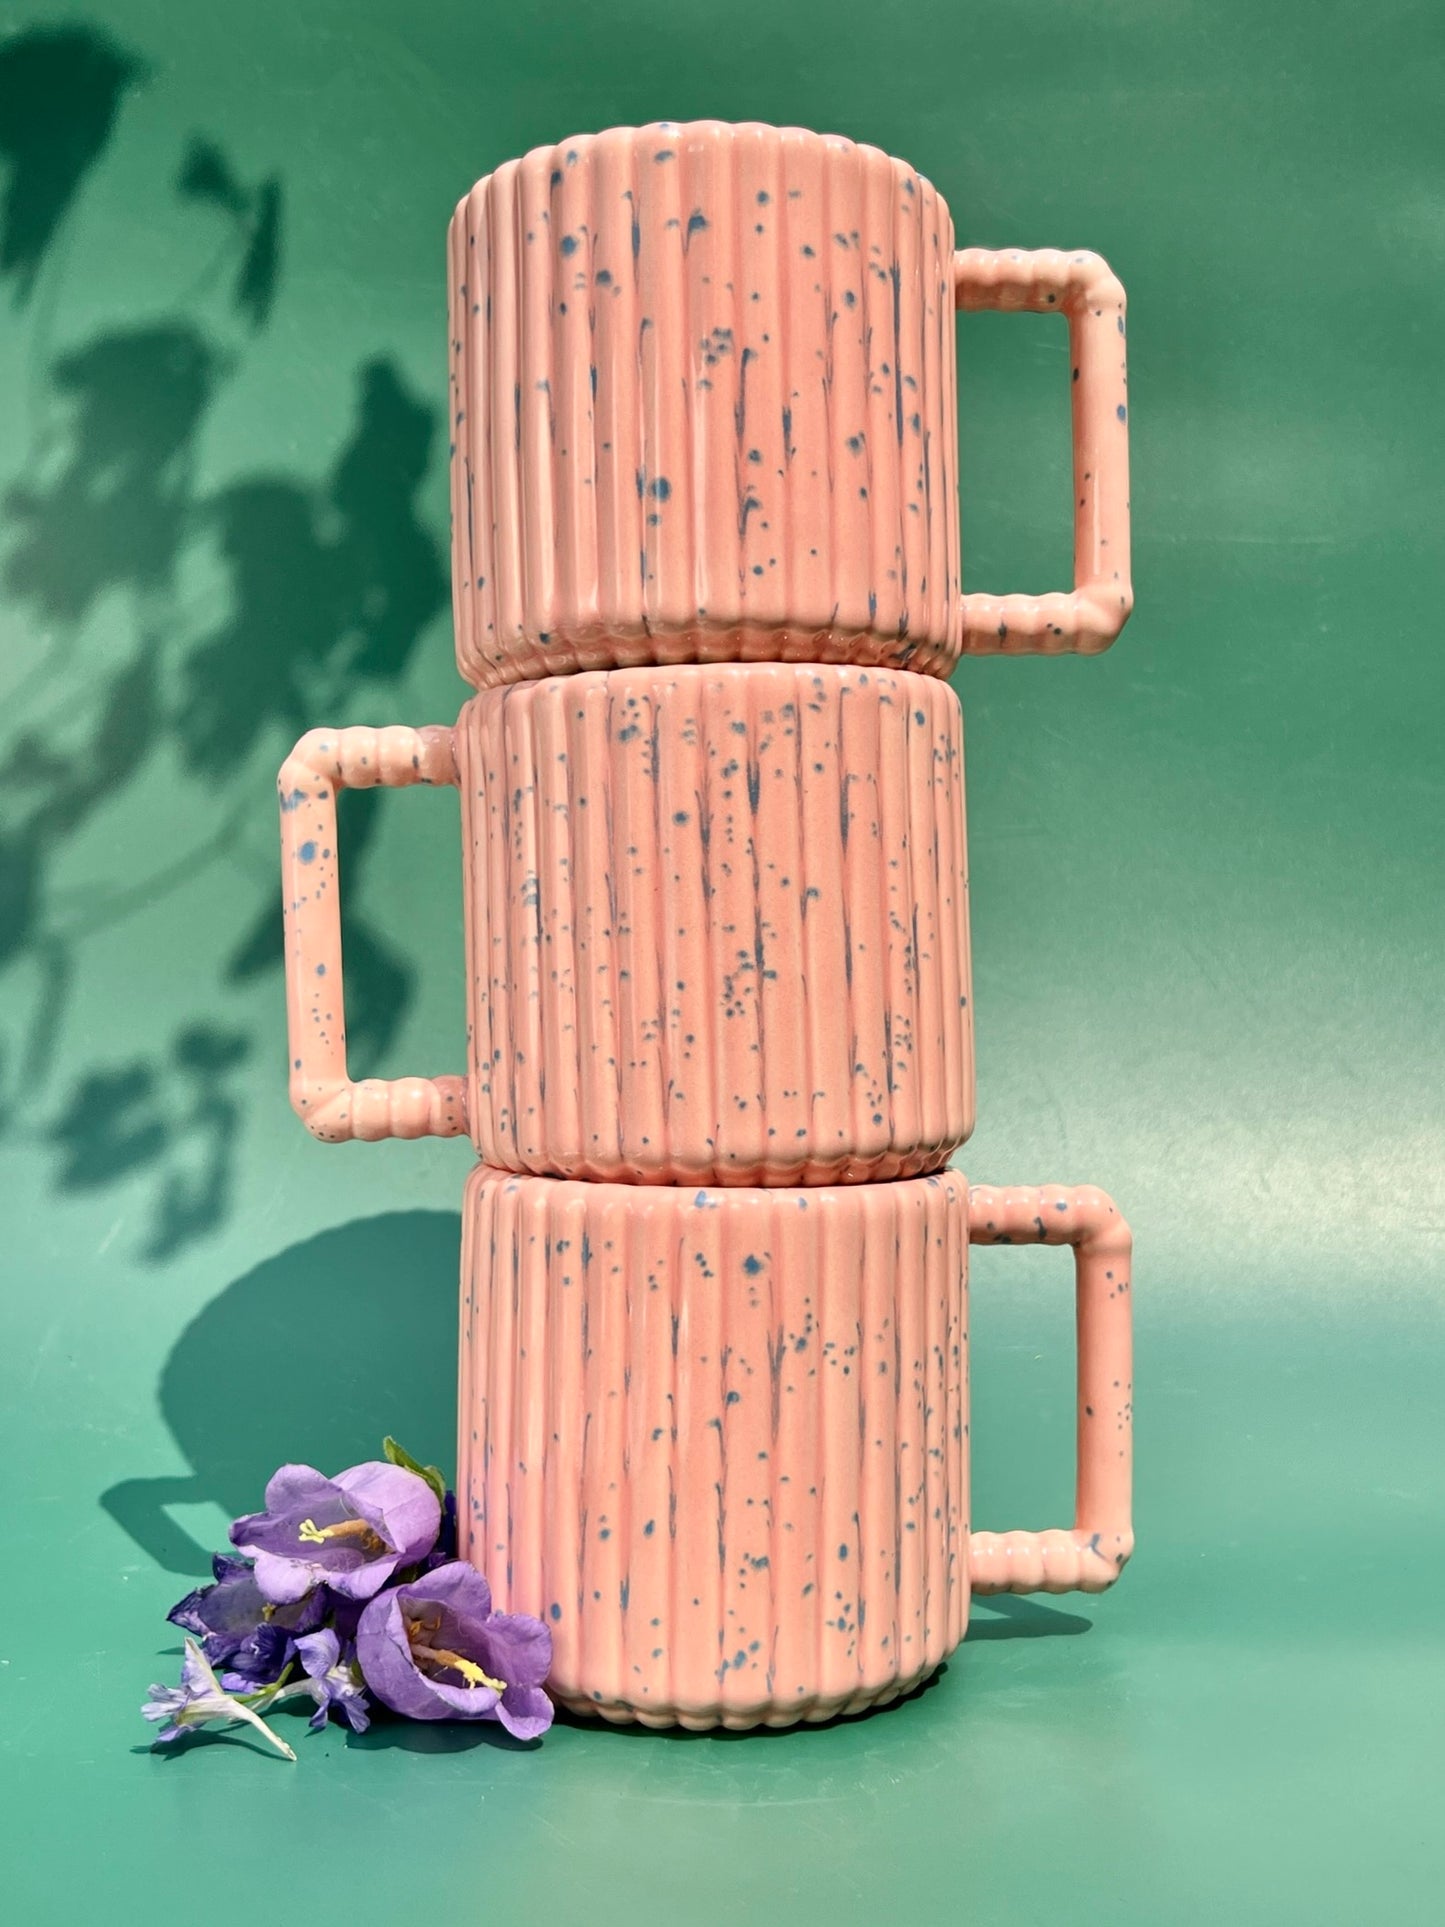 ♥PREORDER♥ Gozarian Mug with Vertical Texture in Pink and Aqua Fleck